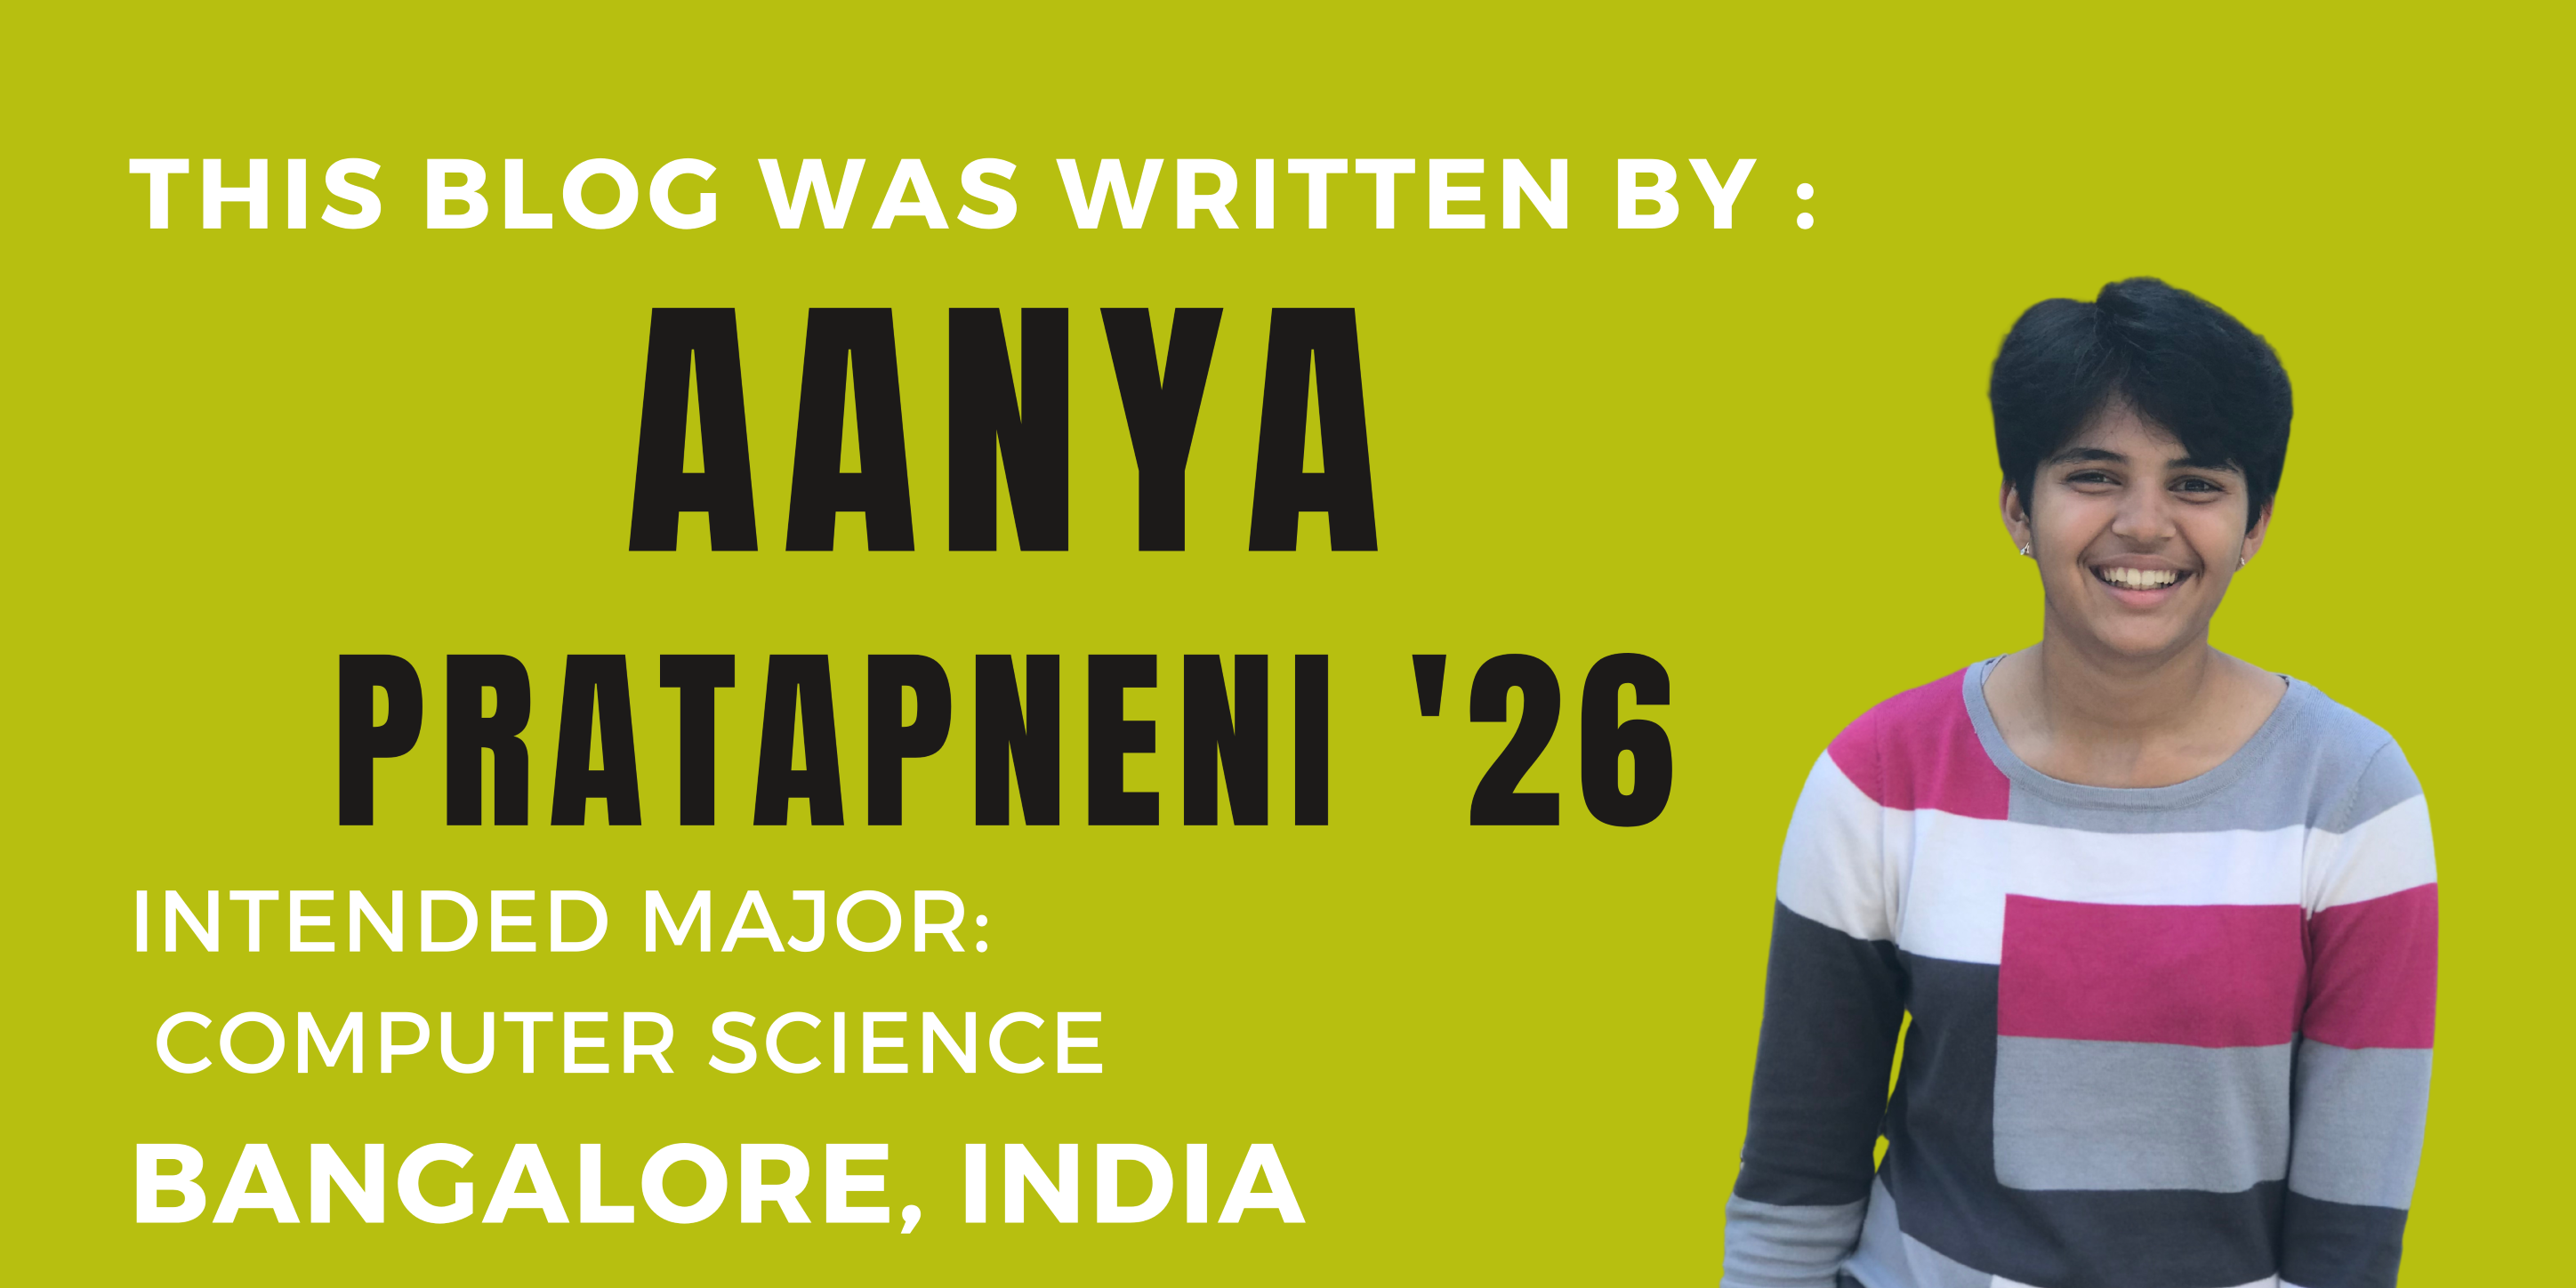 This blog was written by: Aanya Pratapneni. Intended major: computer science. Bangalore, India